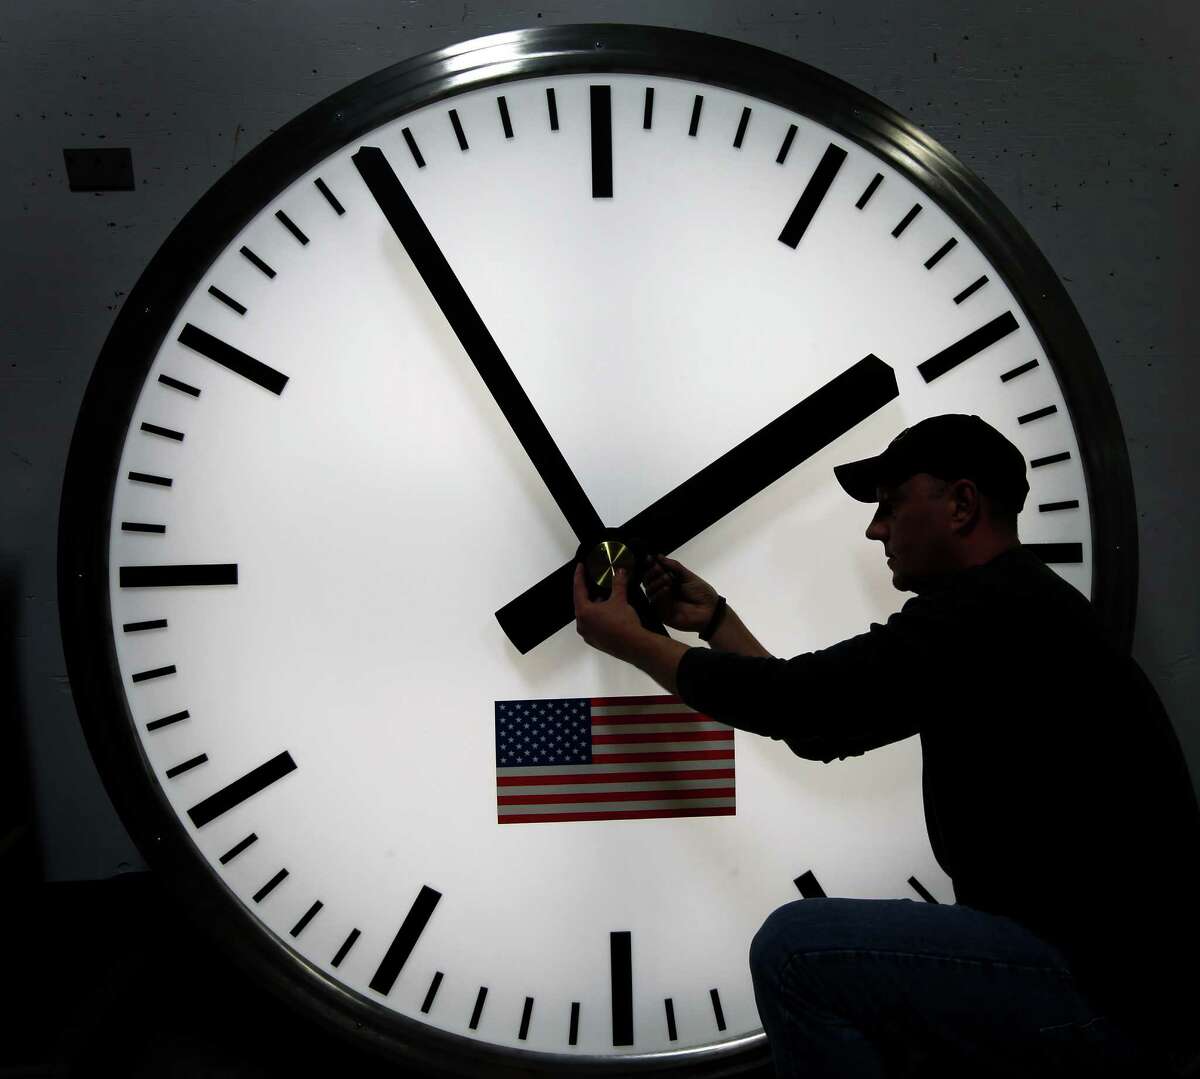 Dave LeMote uses an allen wrench to adjust hands on a stainless steel tower clock at Electric Time Company, Inc. in Medfield, Mass., Friday, March 7, 2014. Most Americans will set their clocks 60 minutes forward before heading to bed Saturday night, but daylight saving time officially starts Sunday at 2 a.m. local time (0700GMT). (AP Photo/Elise Amendola)